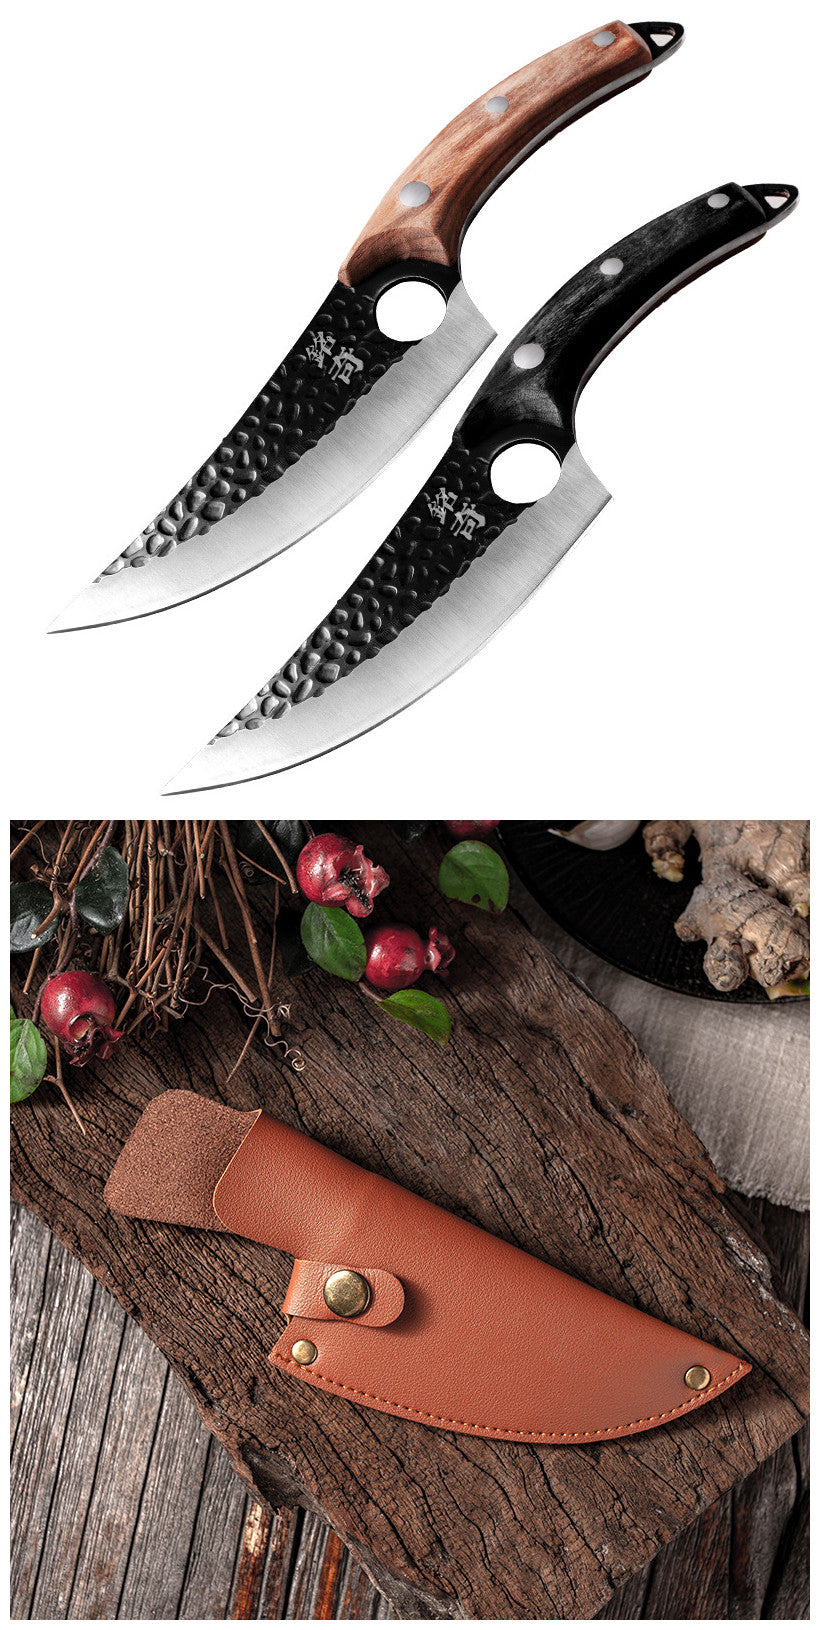 Small Scimitar For Slaughtering And Cutting Meat